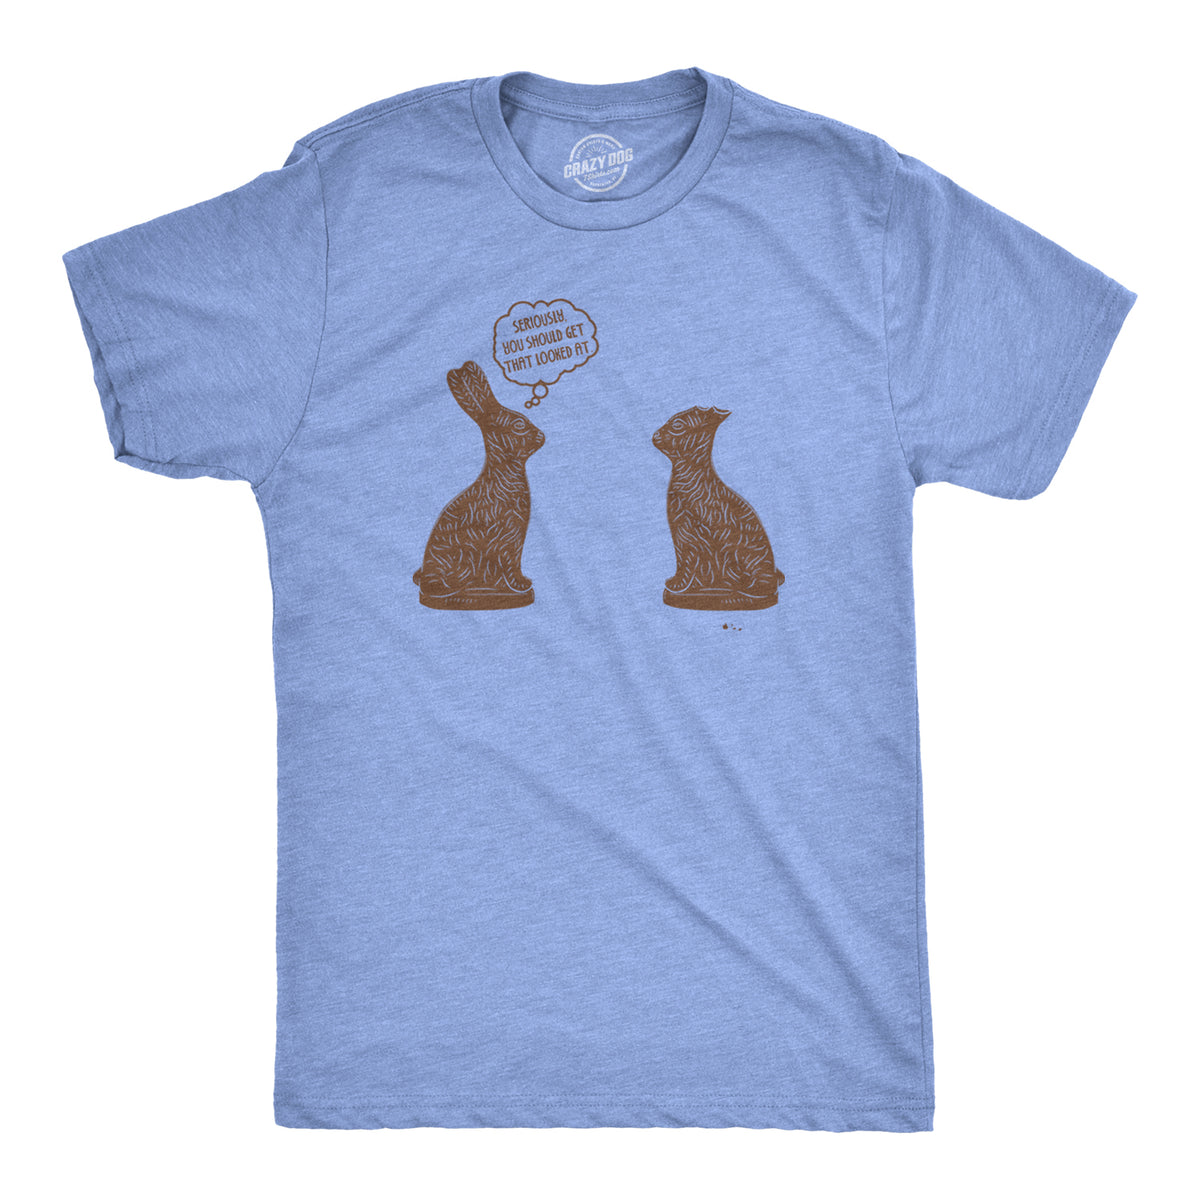 Funny Heather Light Blue You Should Get That Looked At Mens T Shirt Nerdy Easter Tee